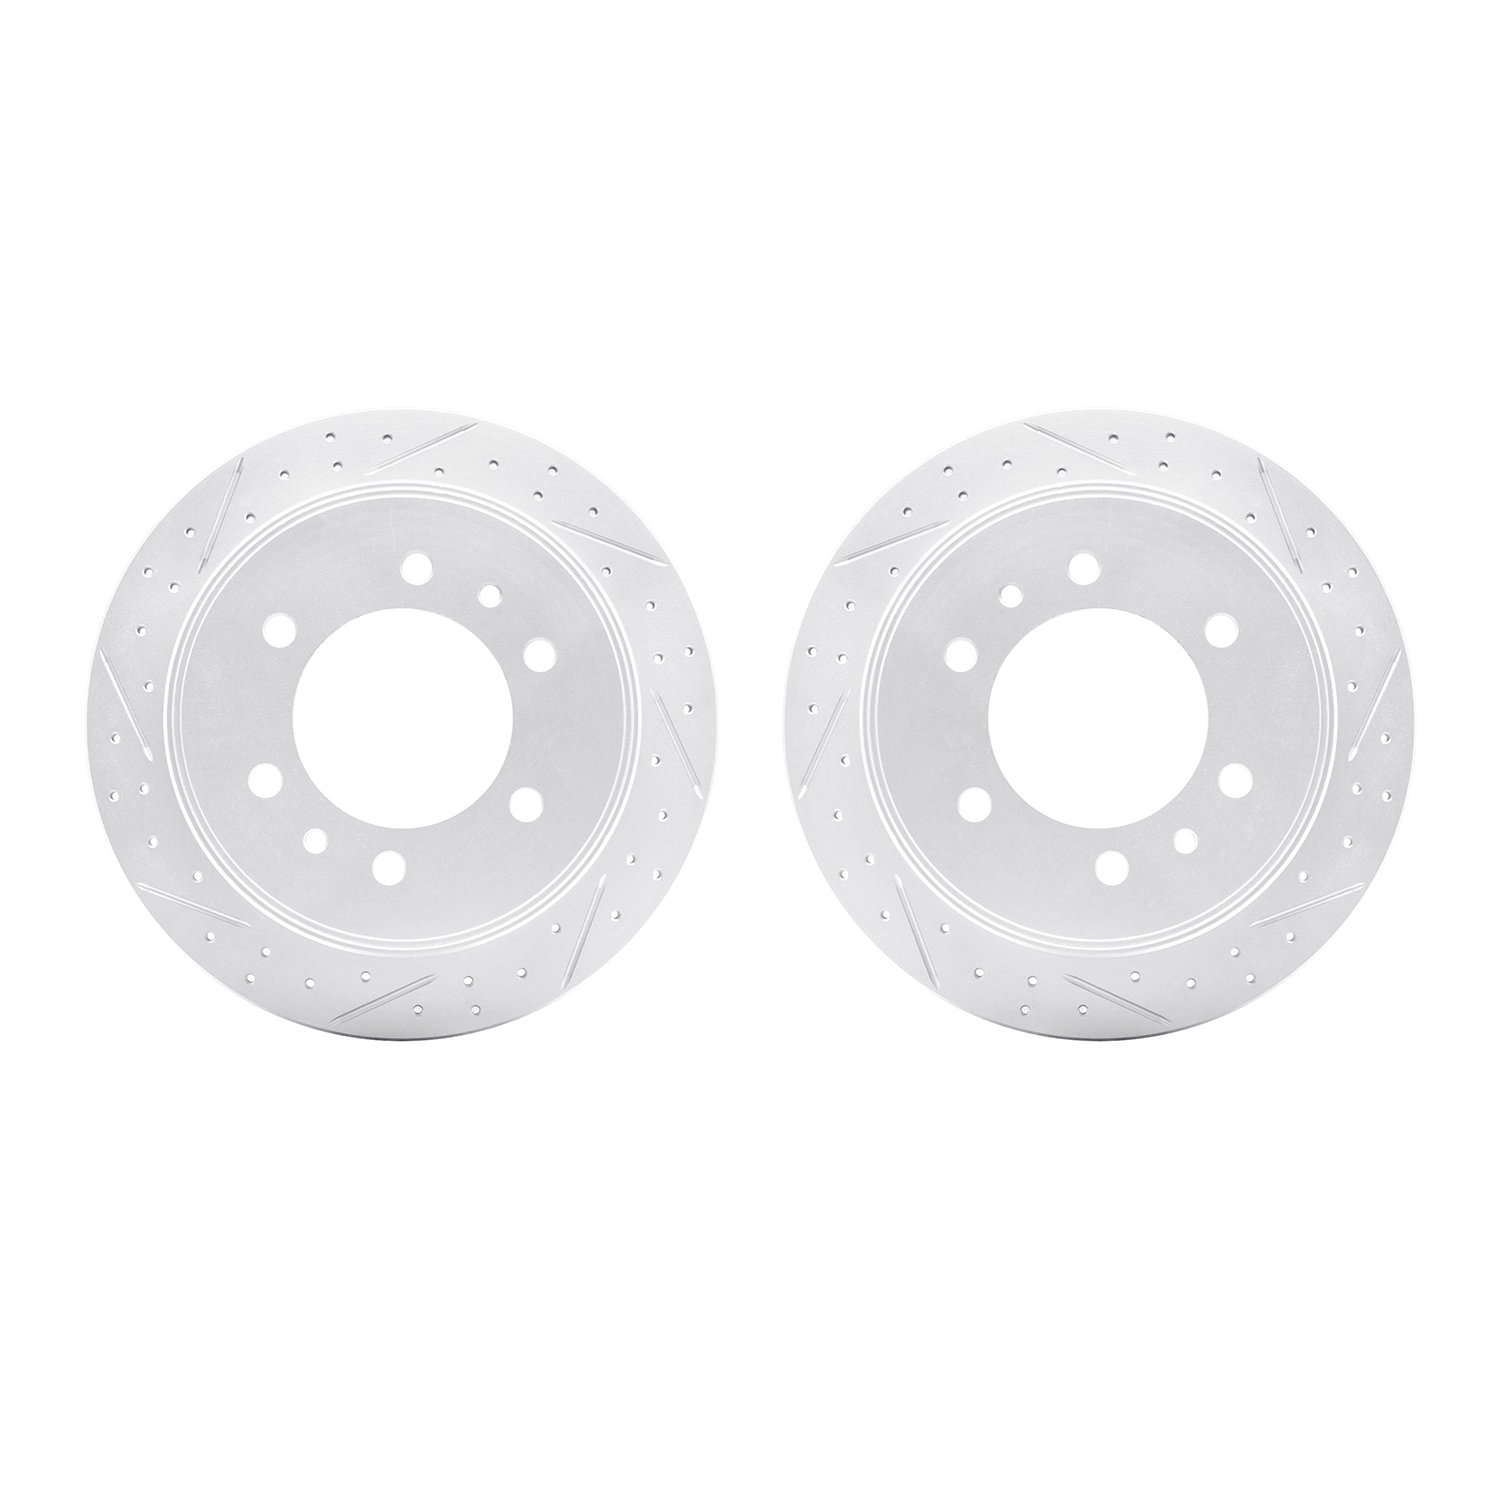 2002-93001 Geoperformance Drilled/Slotted Brake Rotors, 2006-2010 GM, Position: Rear